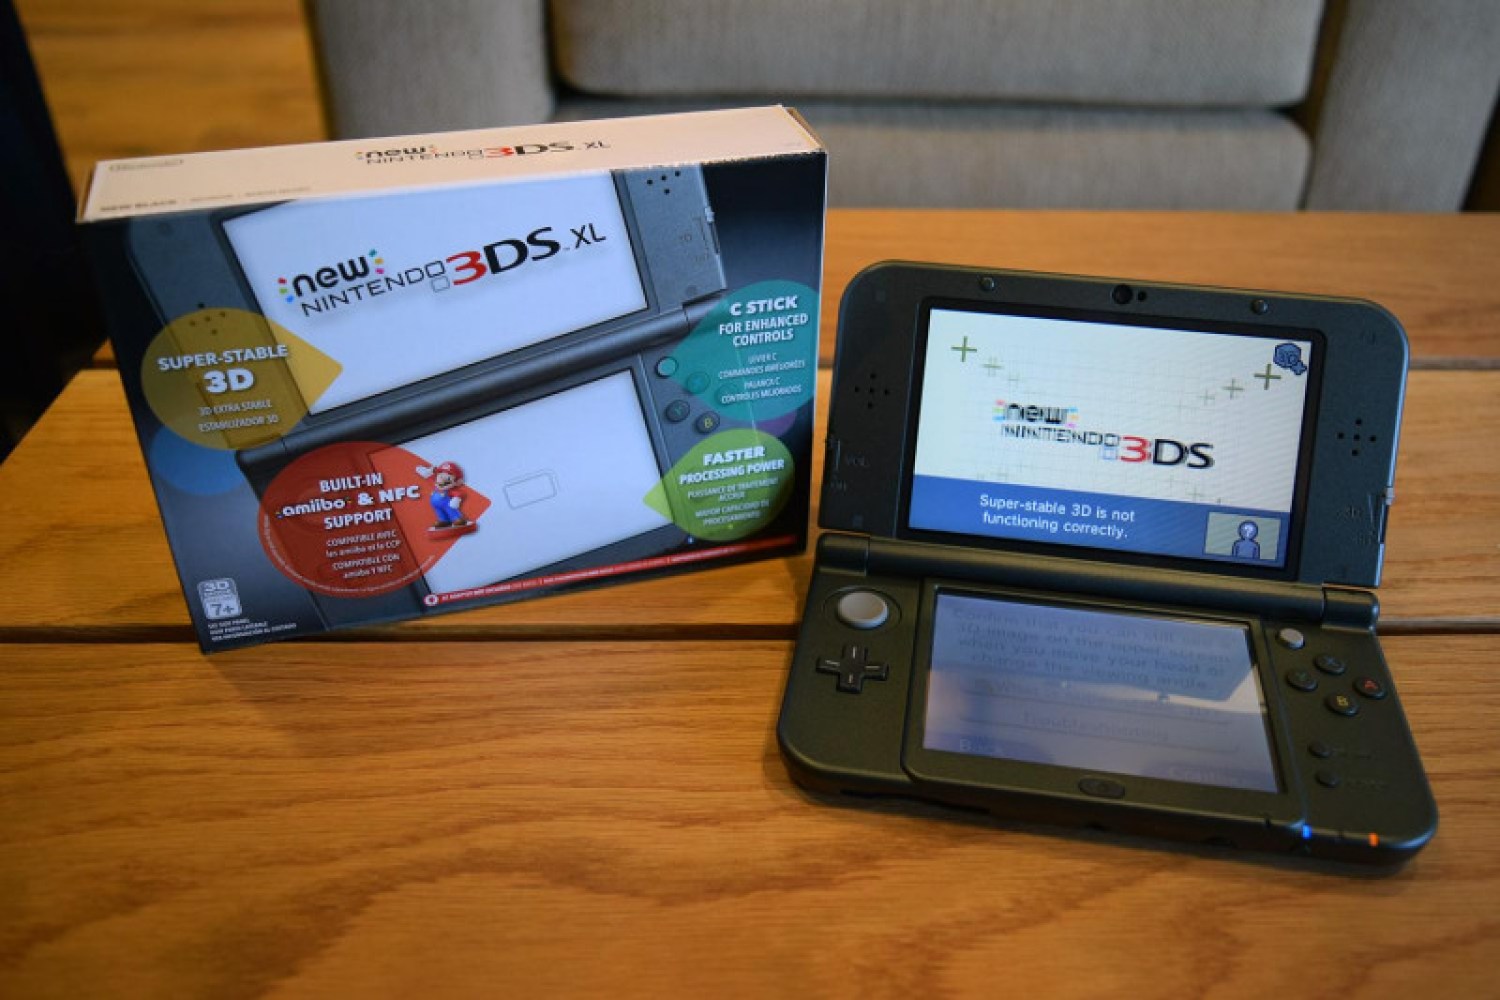 Should I Buy a Nintendo Switch or 3DS? It Depends.